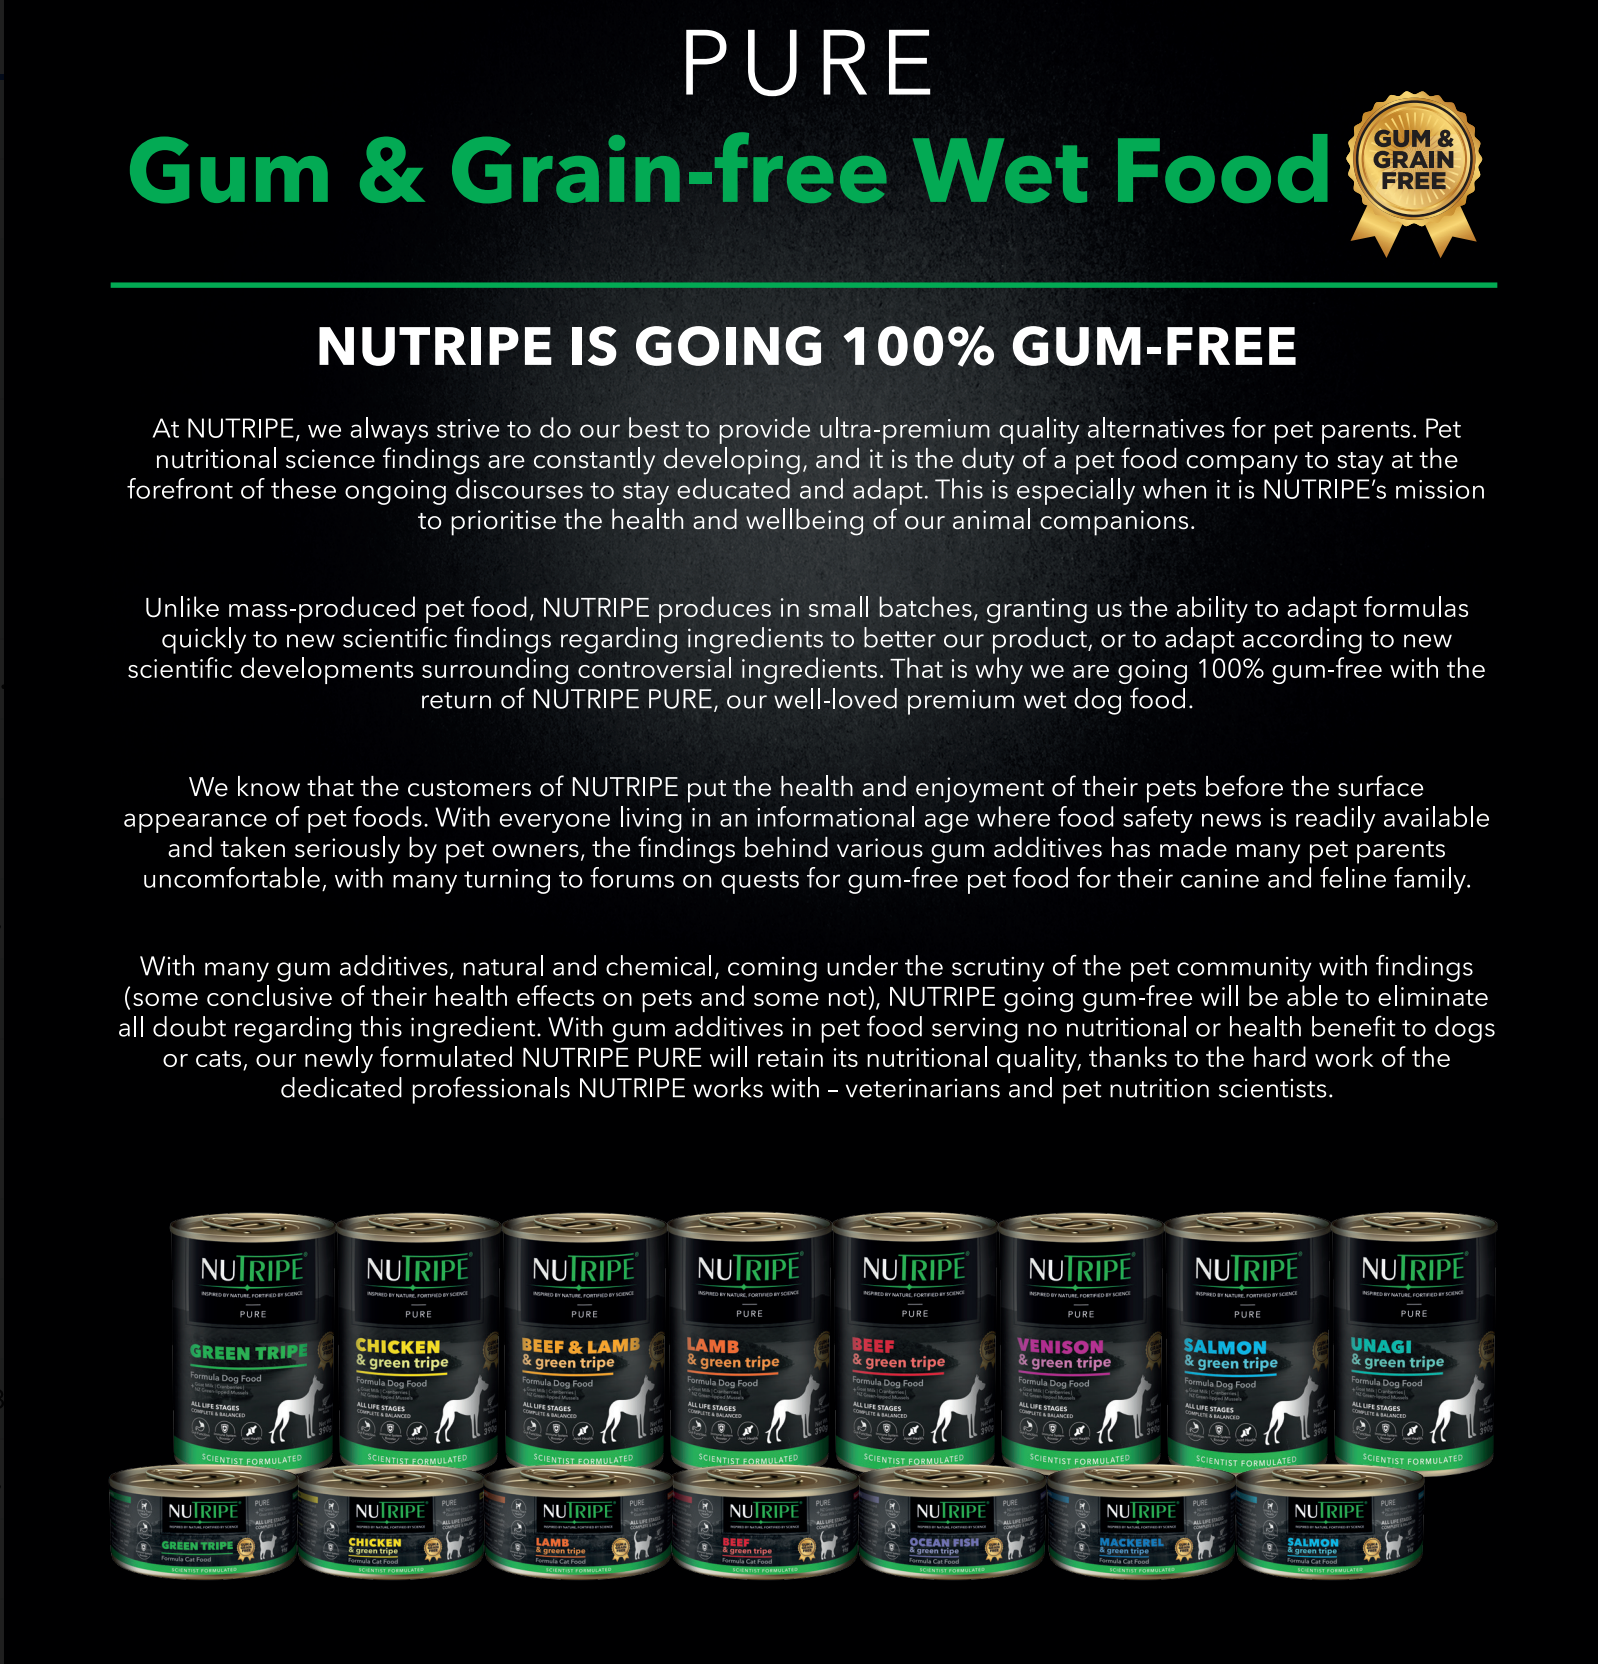 Your Whole Dog's NUTRIPE PURE Lamb & Green Tripe Dog Food (185g cans) is a pure gum & grain free wet dog food.